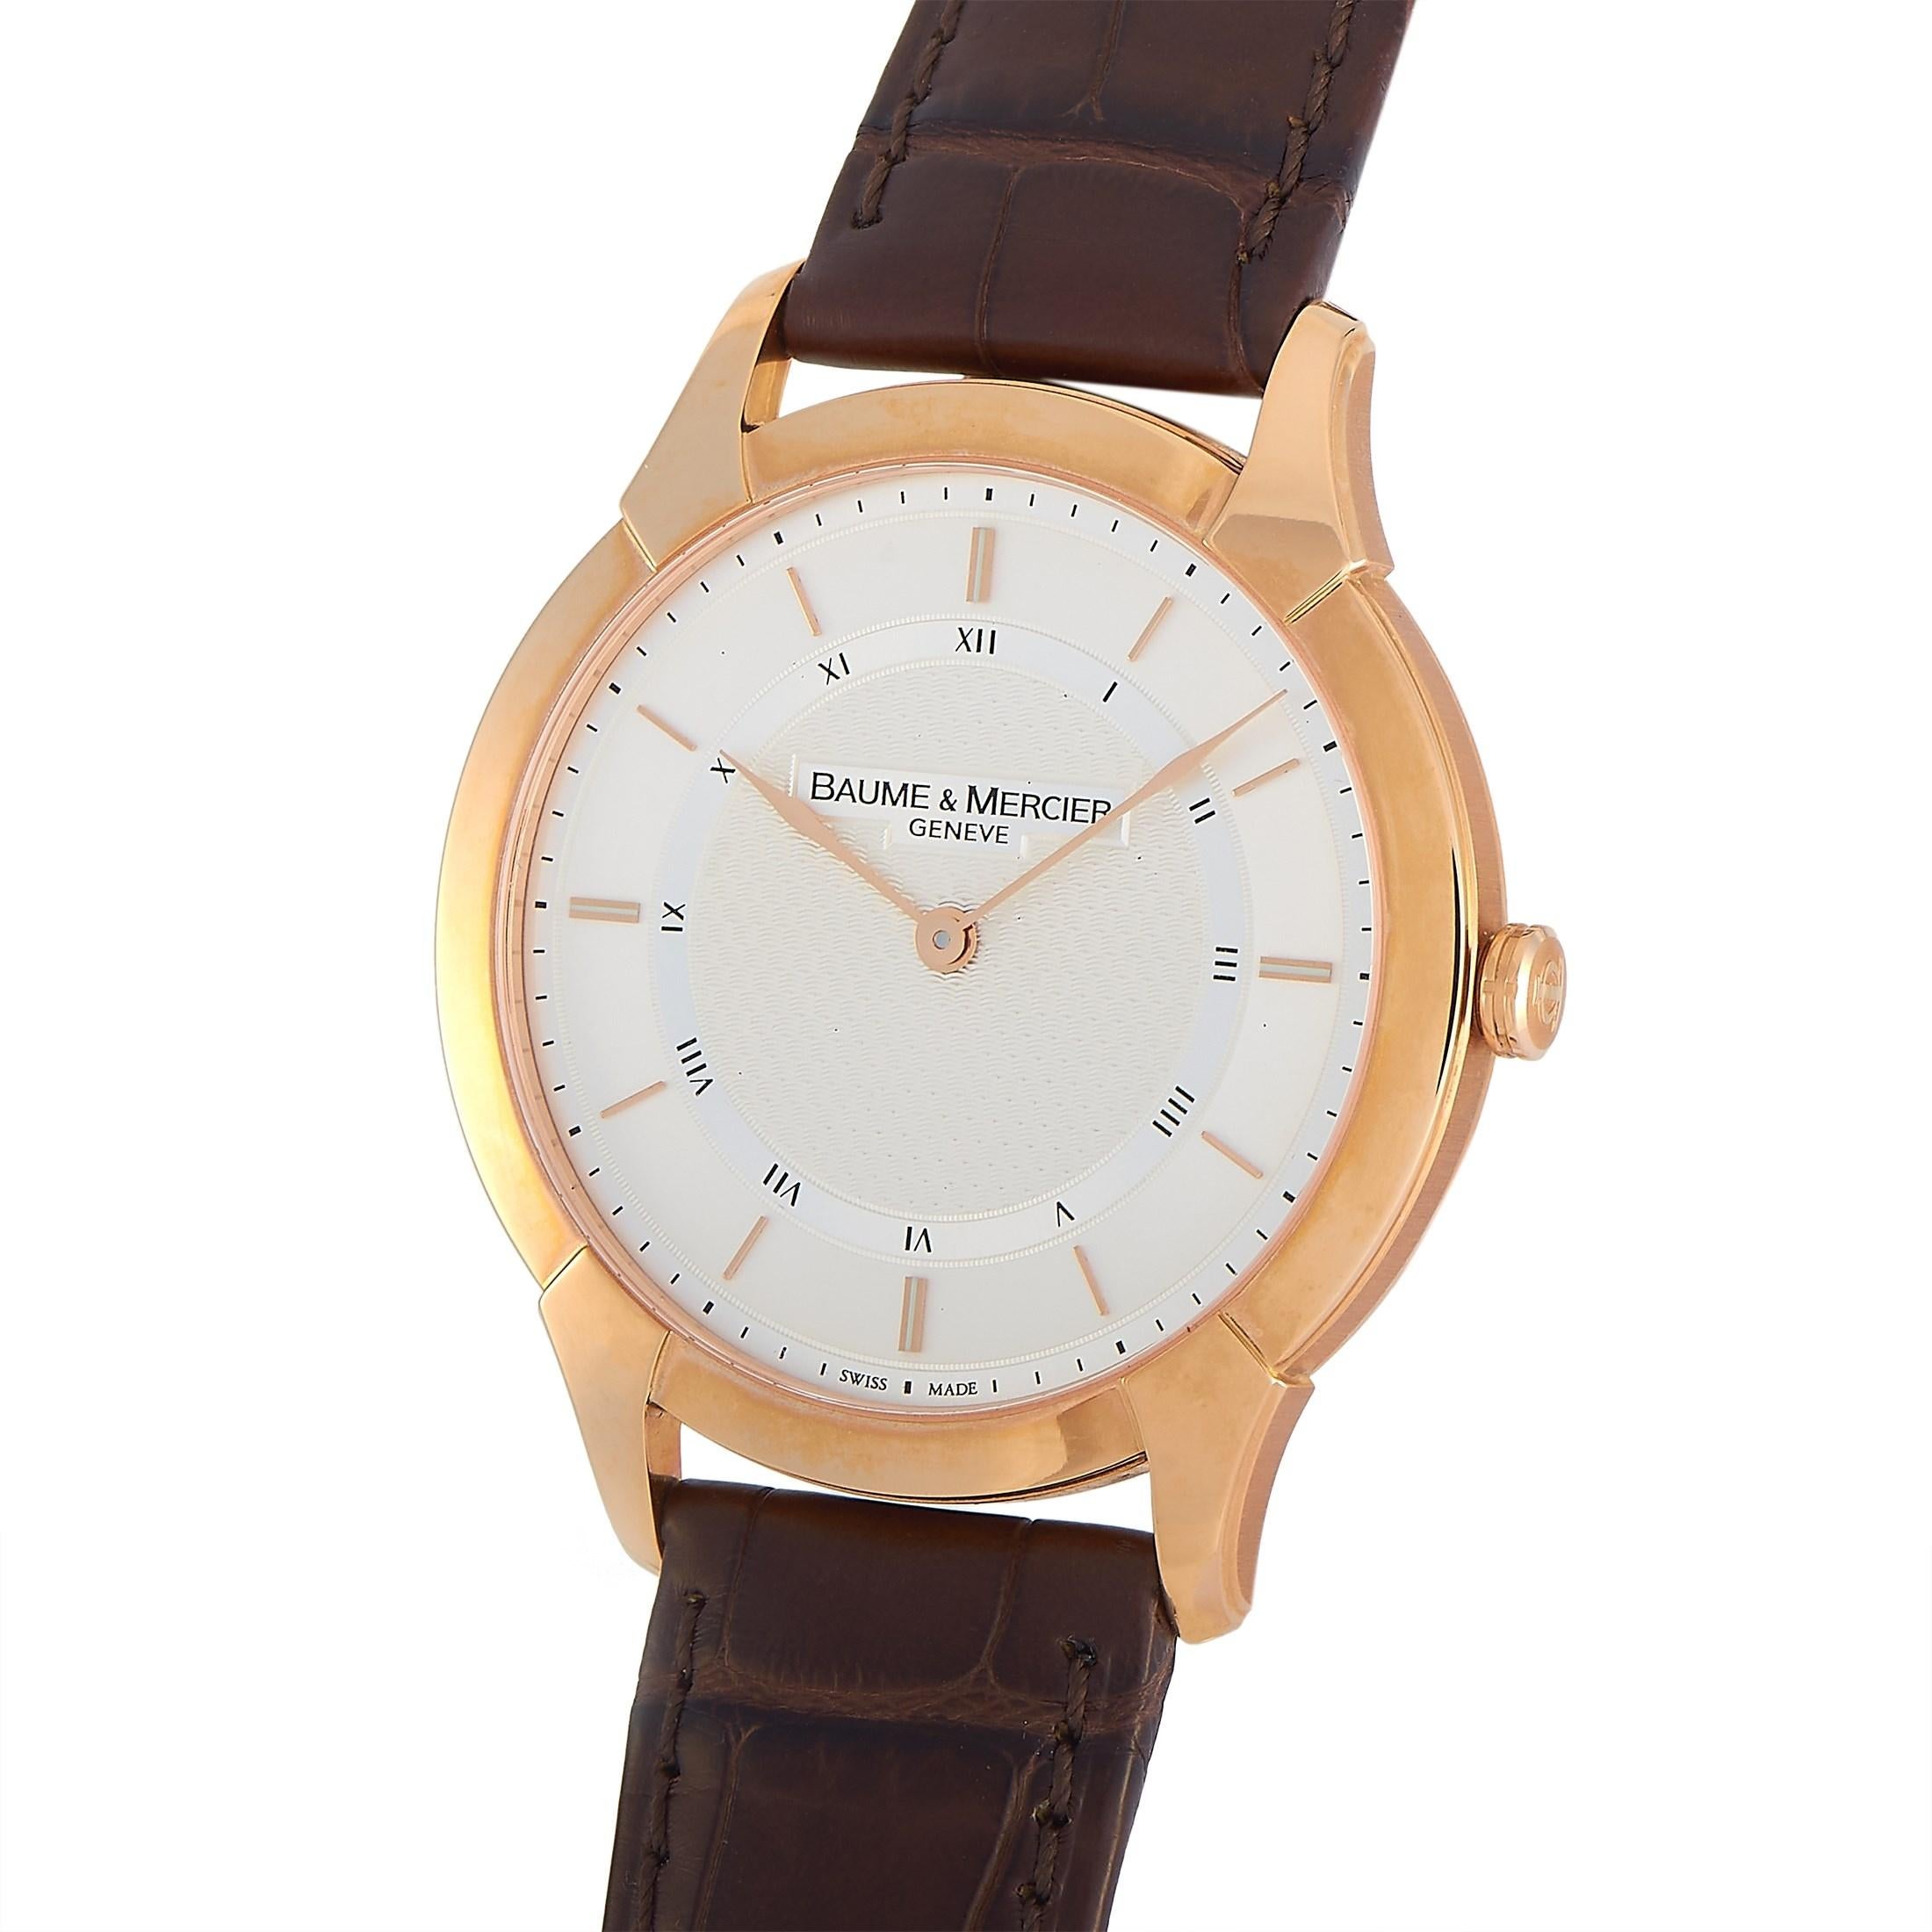 The Baume & Mercier Classima Executives Watch, reference number M0A08801, is the picture of class and sophistication.

This elegant watch features an 18K rose gold, 41mm case attached to a brown leather band. On the stylish silver dial, you’ll find